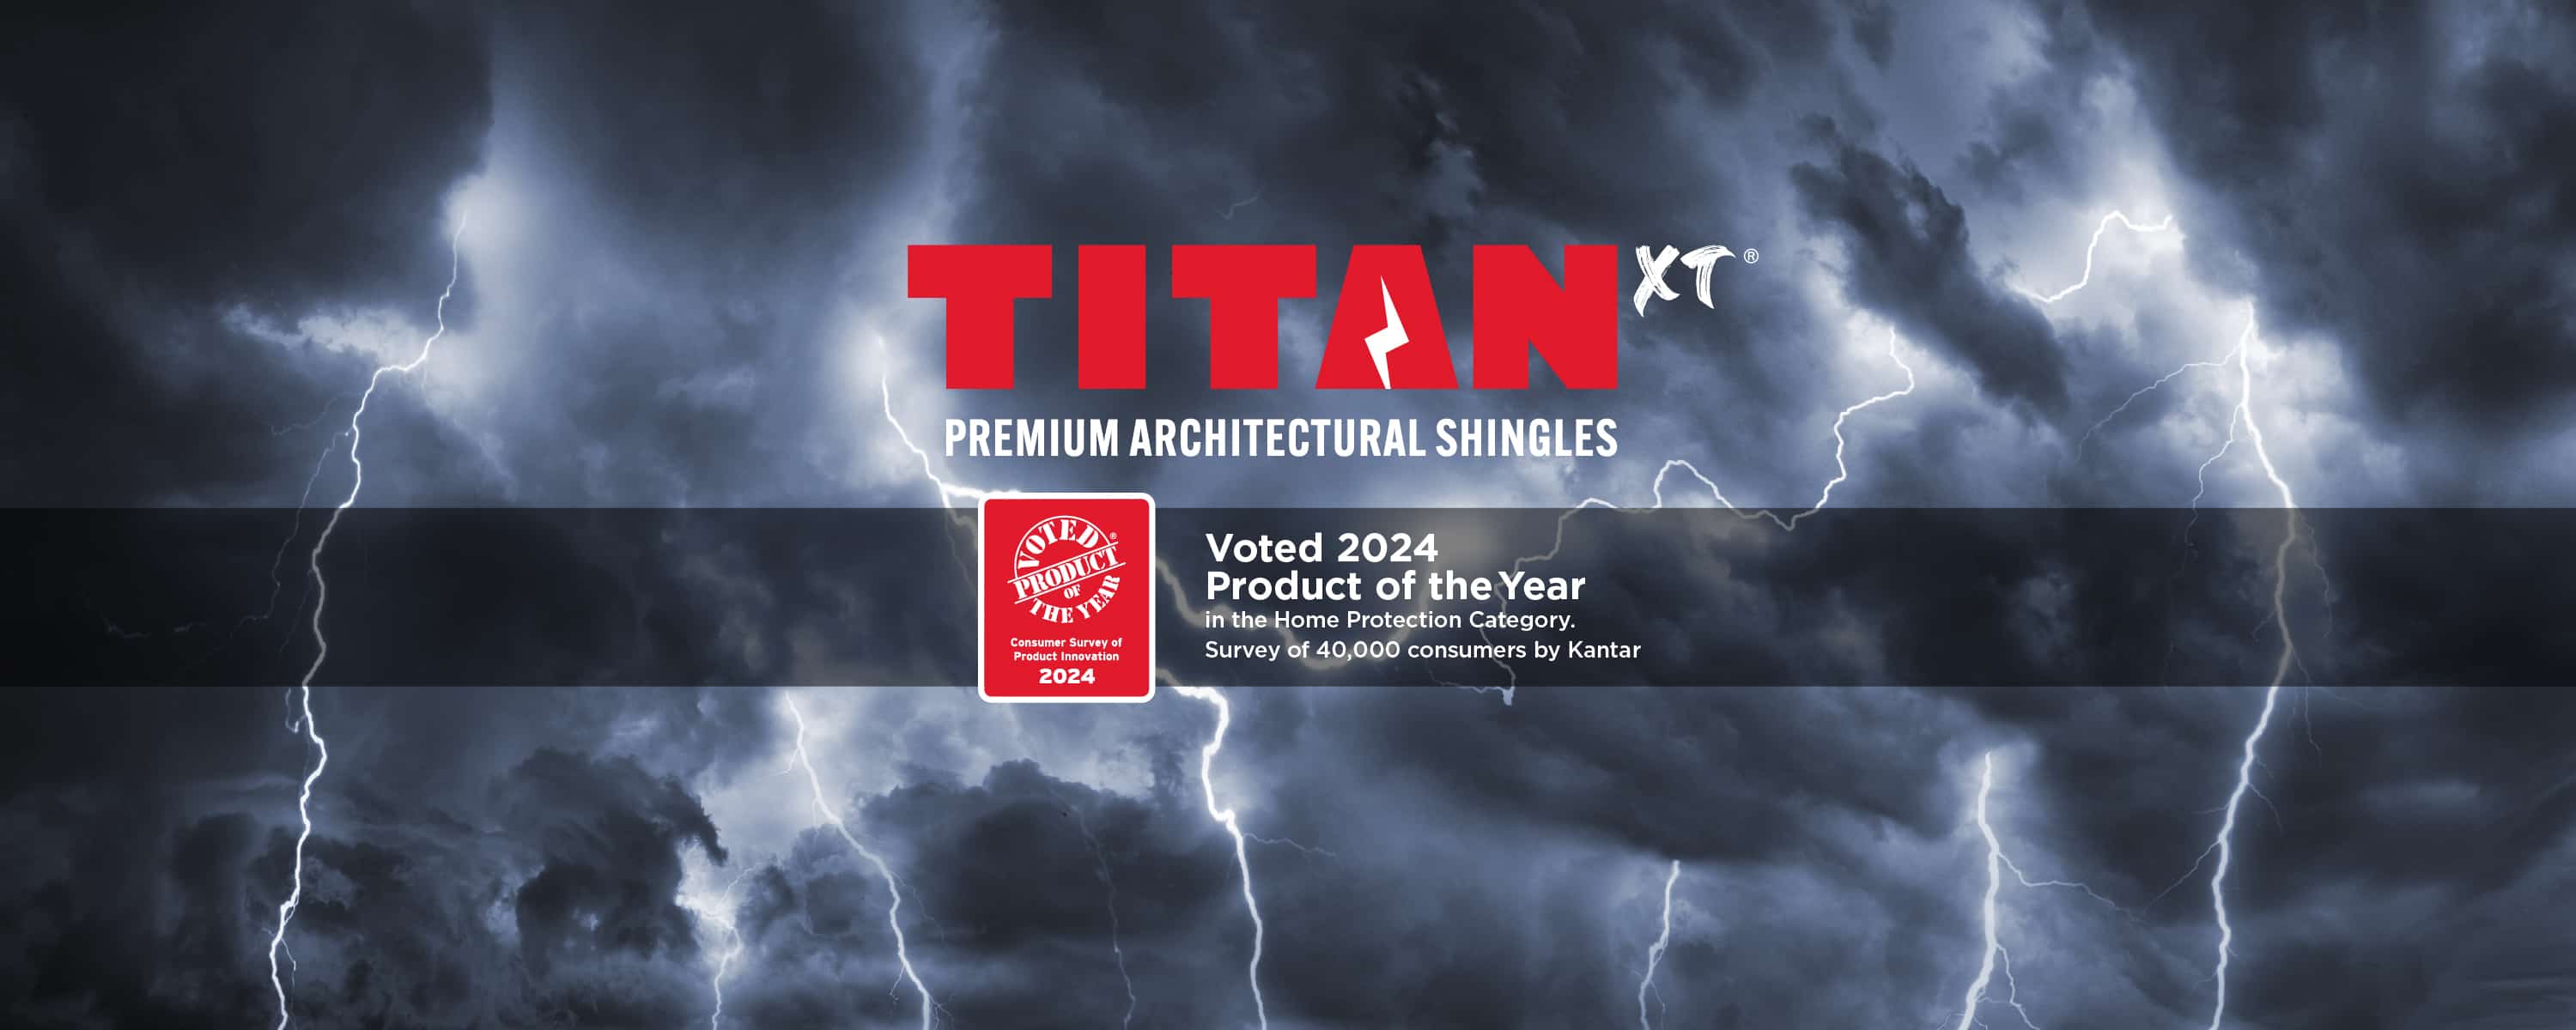 Titan XT - Voted 2024 Product of the Year